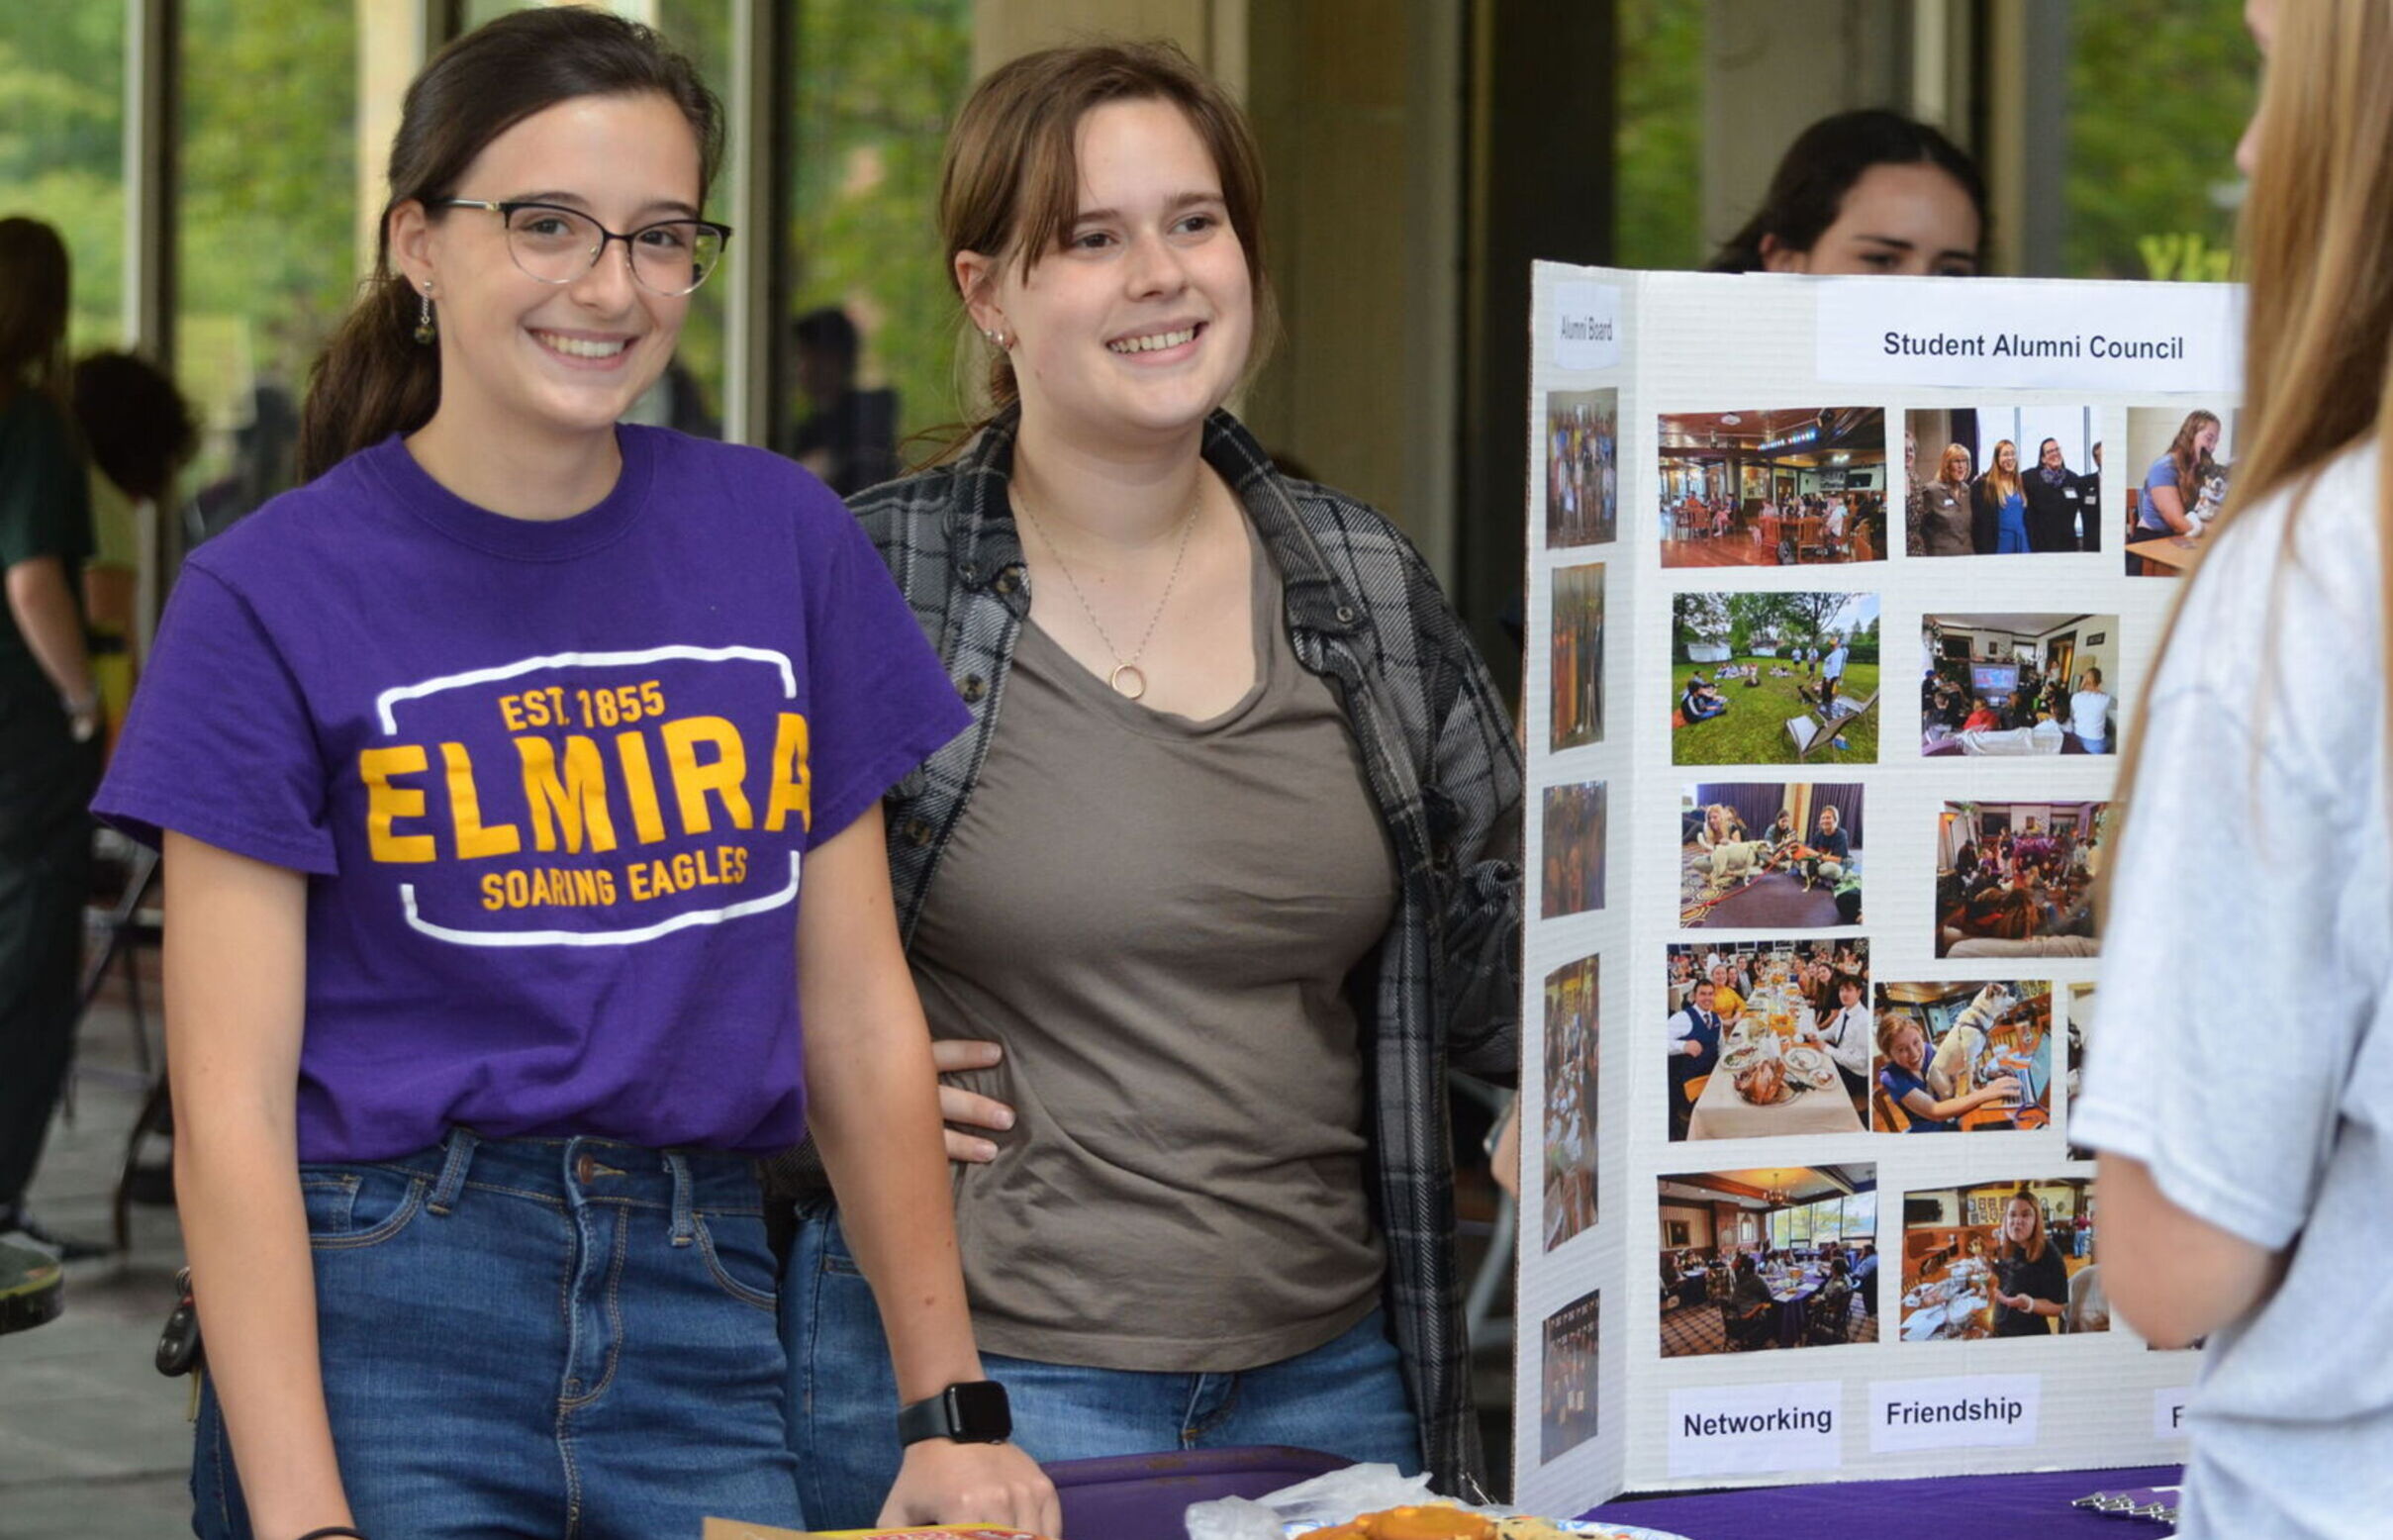 Two female students greet guests at the Student Alumni Council table